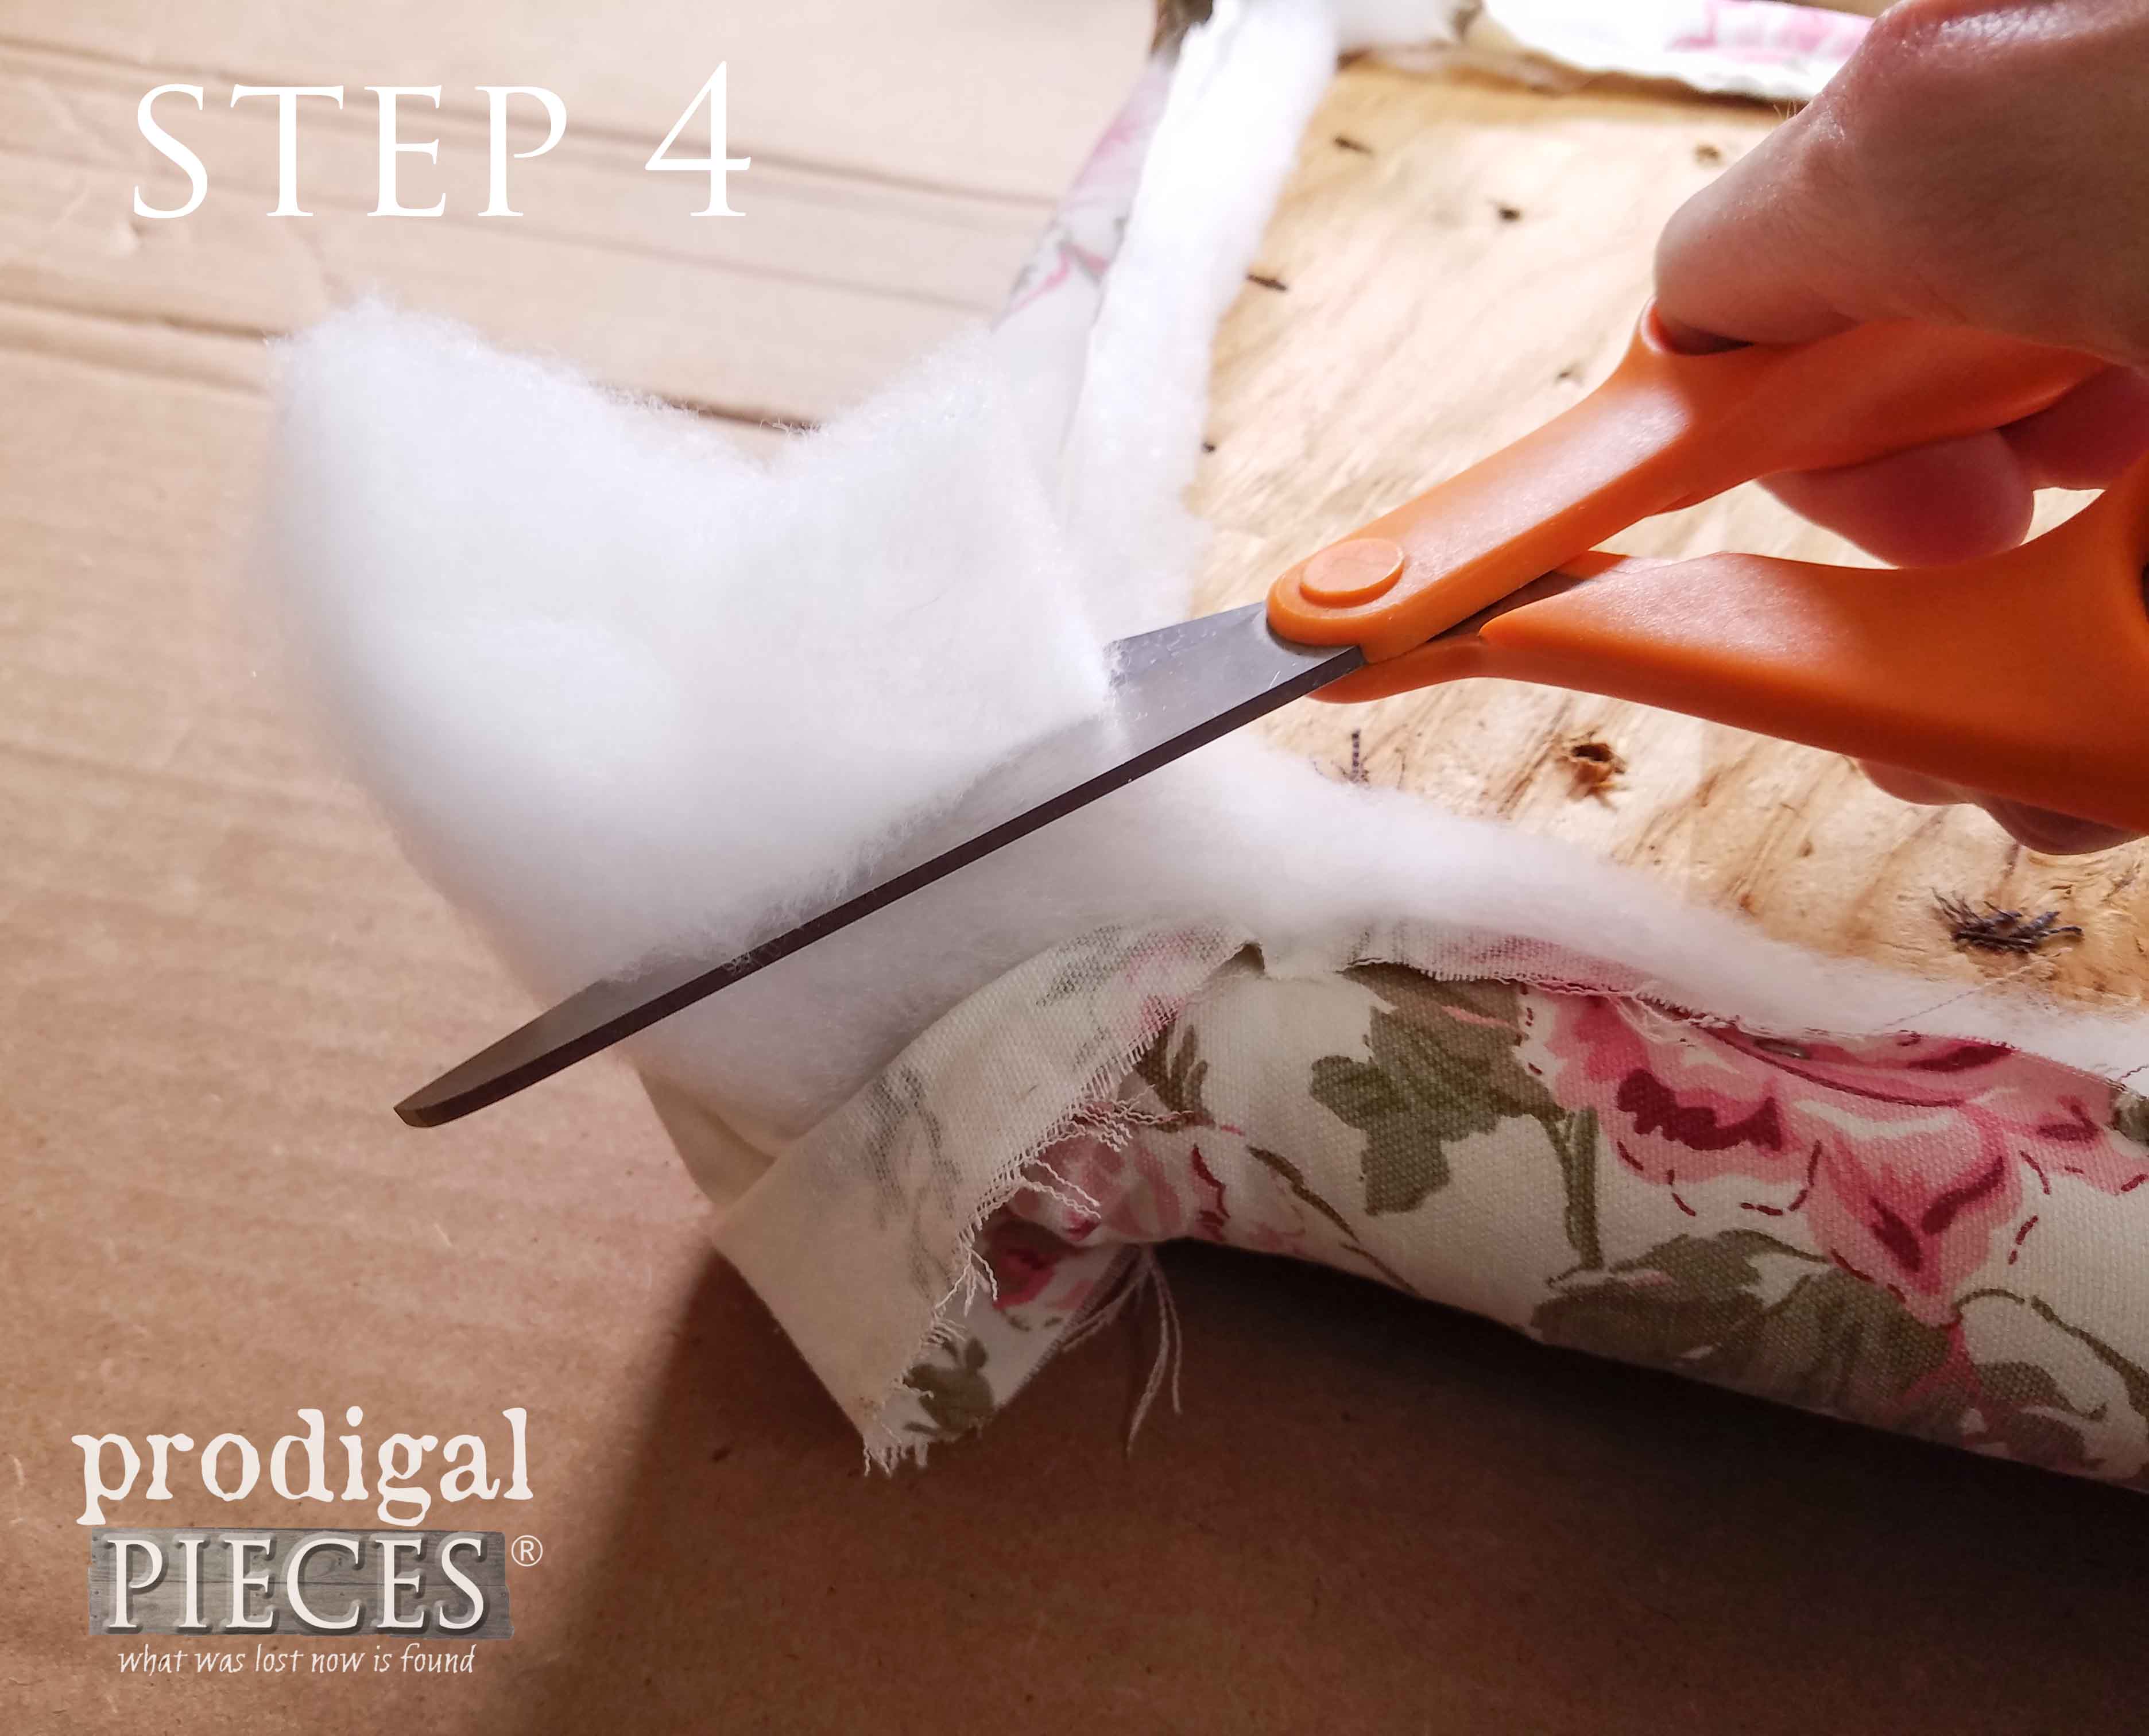 Step 4 of Upholstering Footstool - Cutting Batting | prodigalpieces.com